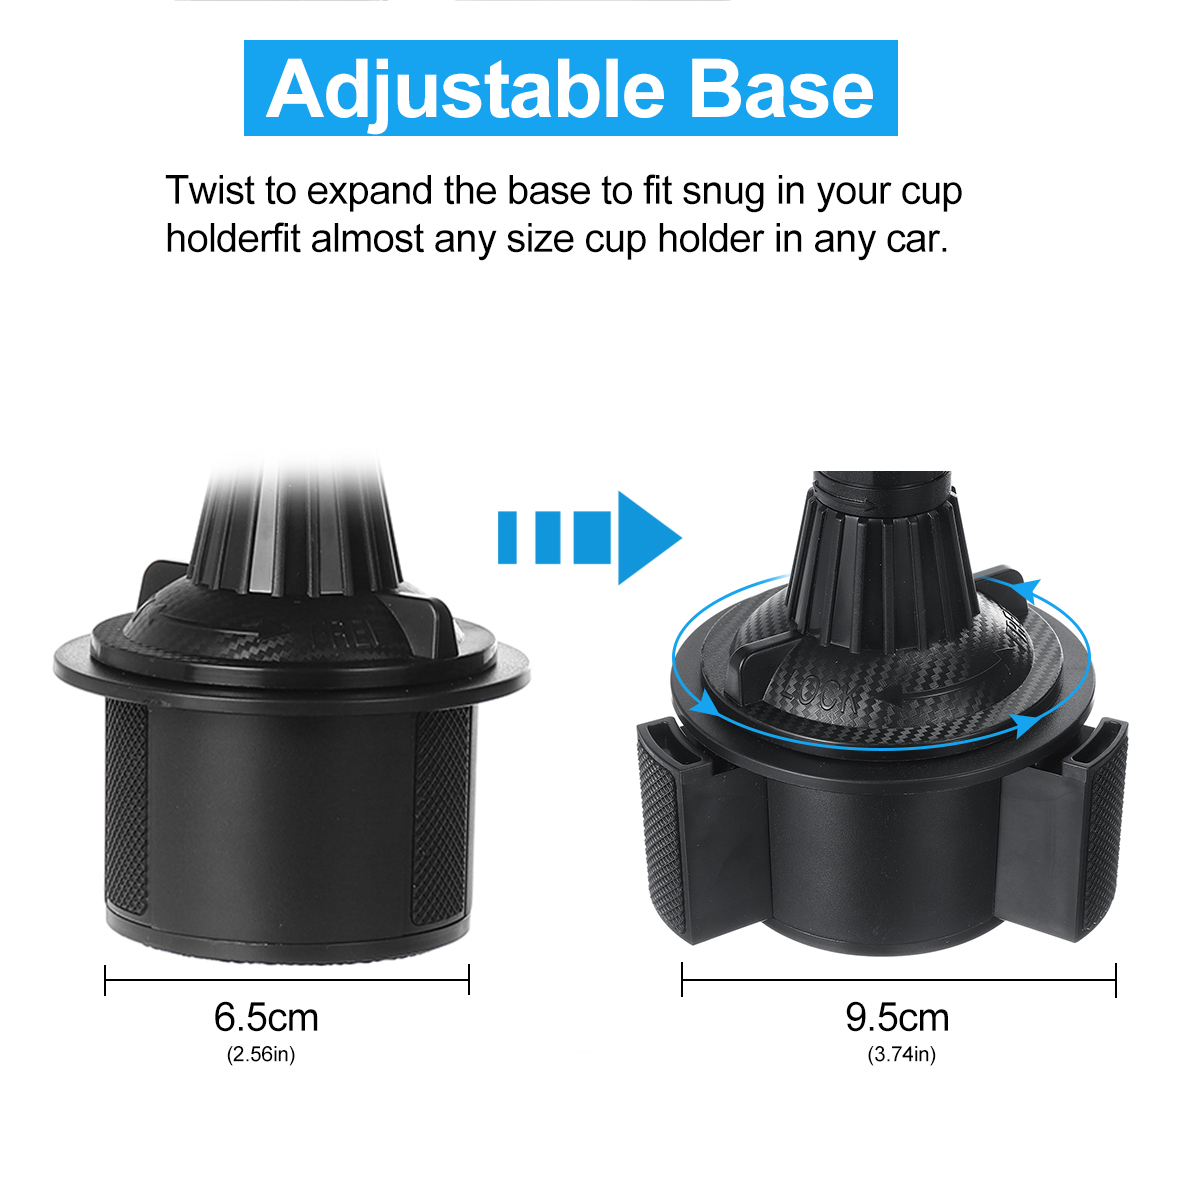 Bakeey Car Mount 360° Adjustable Cup Holder Cradle for iPhone 12 for Samsung Galaxy Note 20 ultra Huawei Mate 40 OnePlus 8T